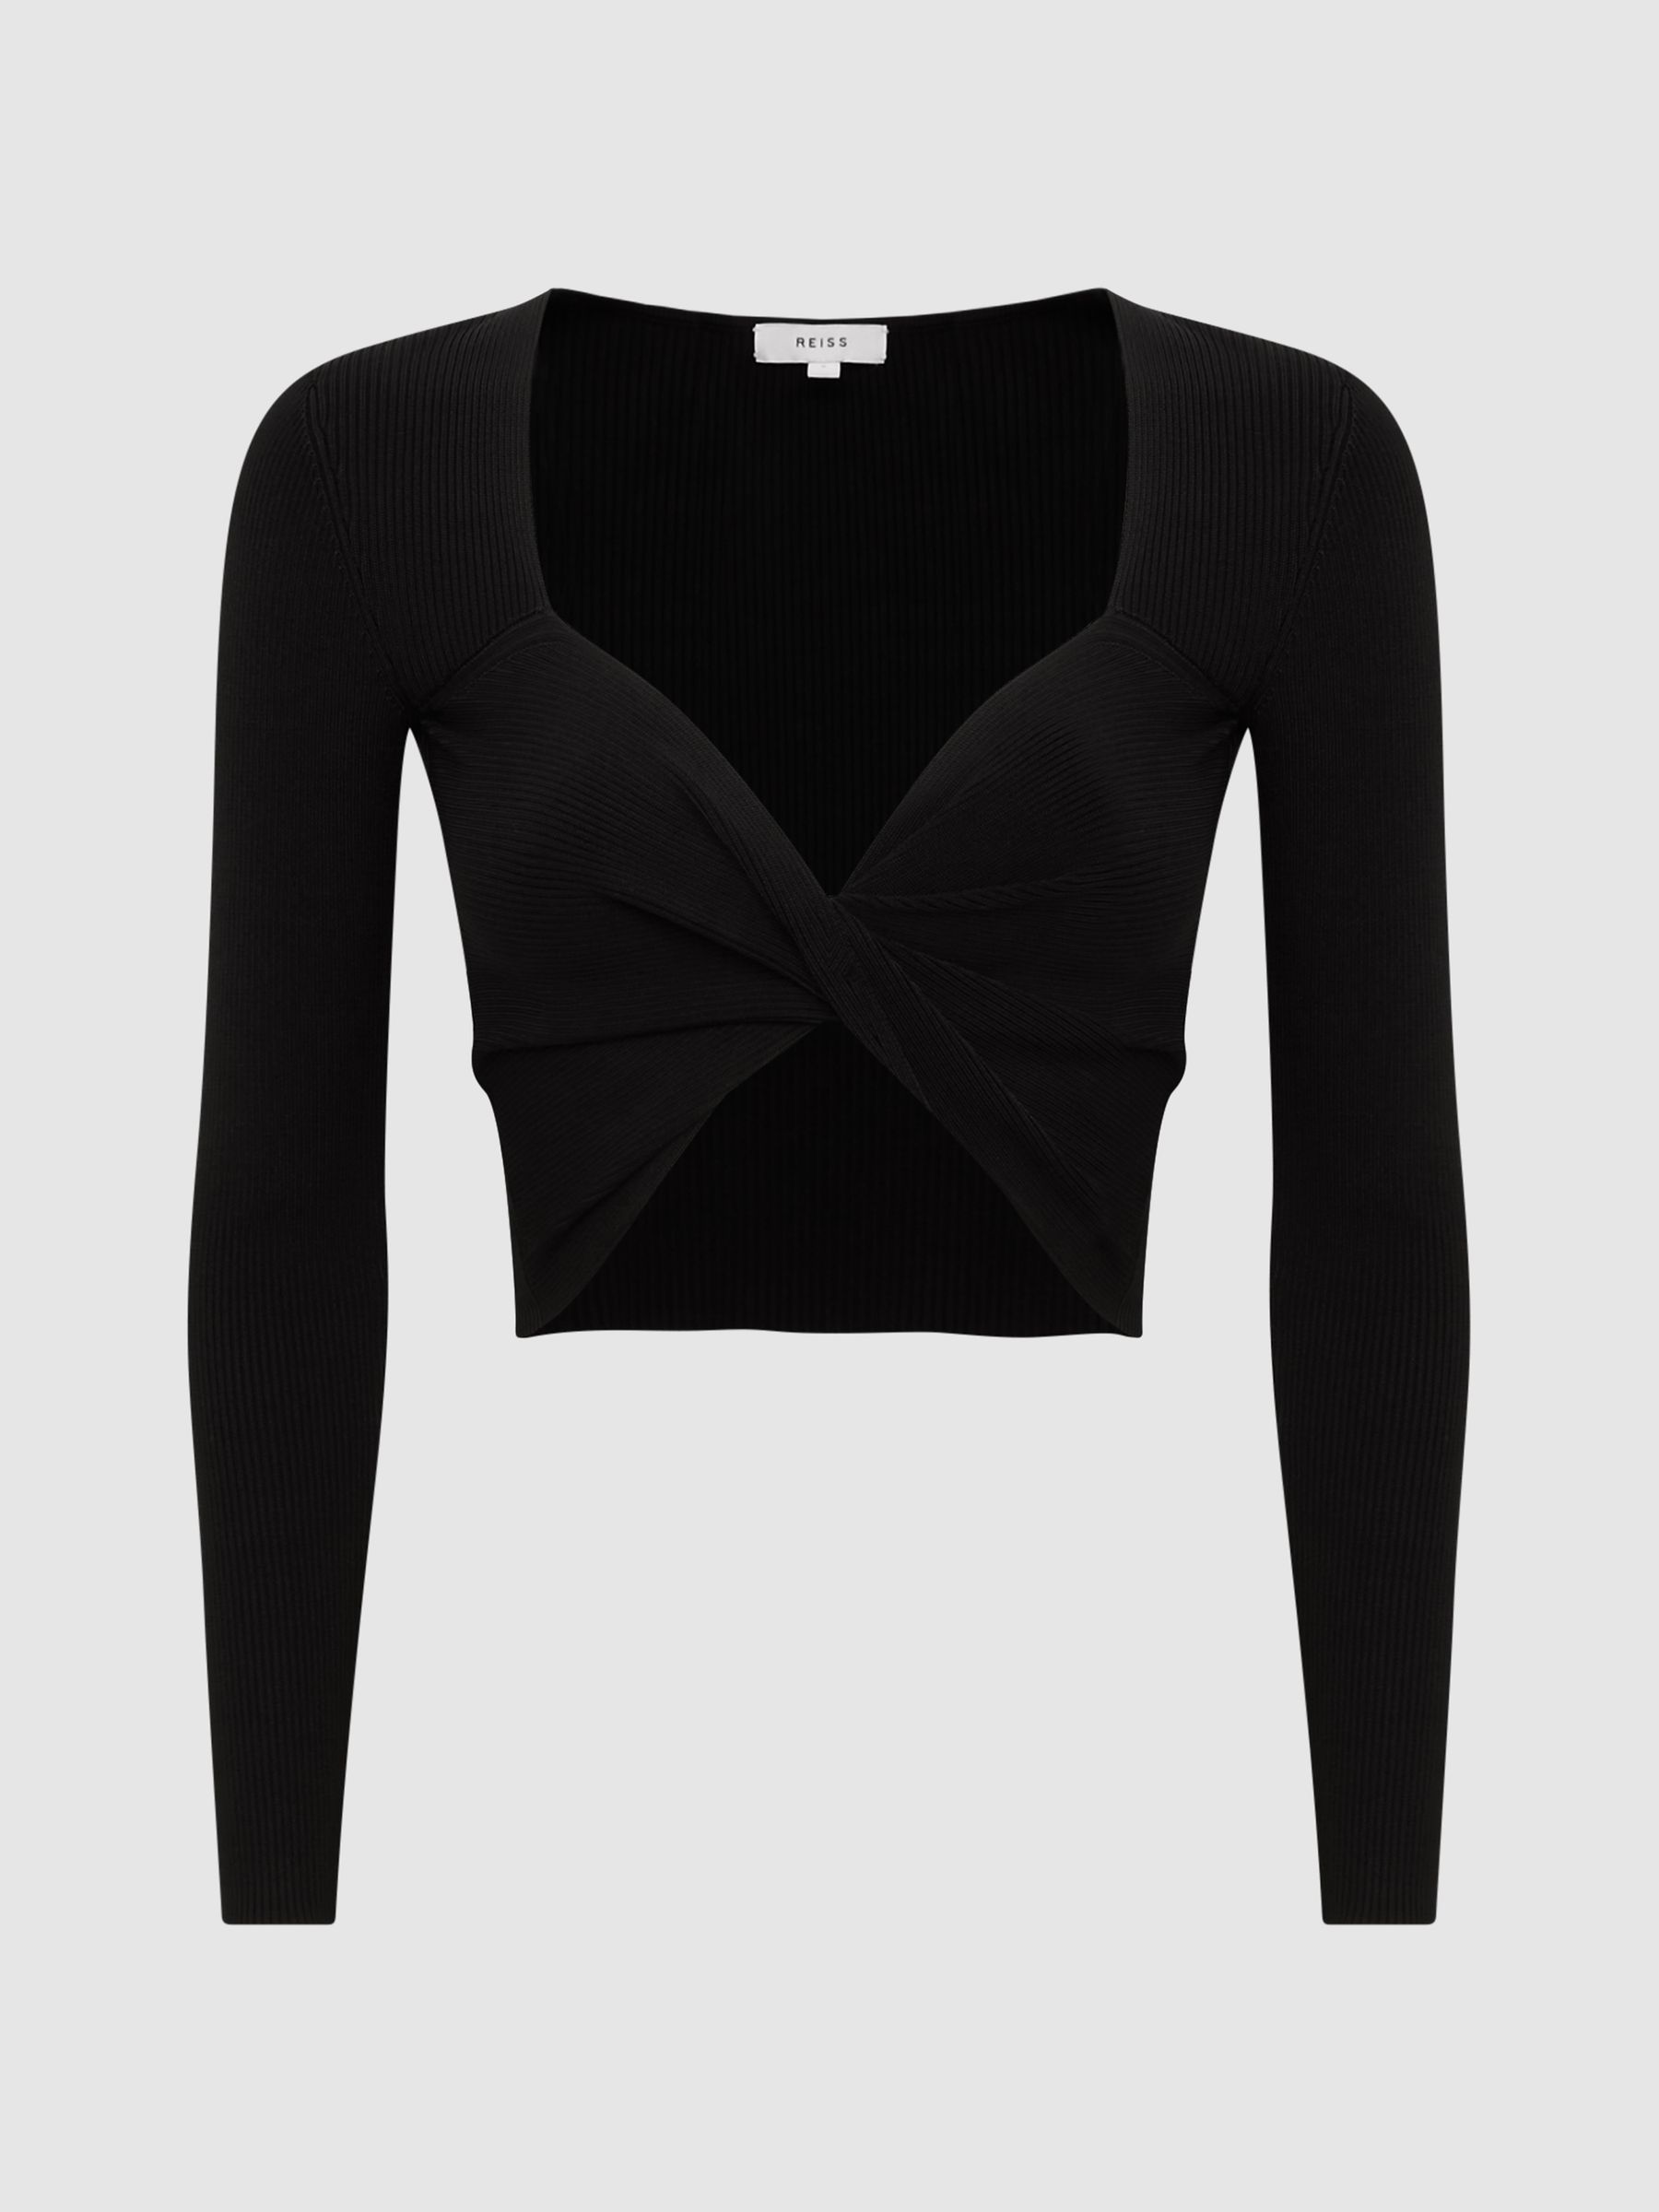 Reiss Iona Knitted Twist Cropped Top - REISS